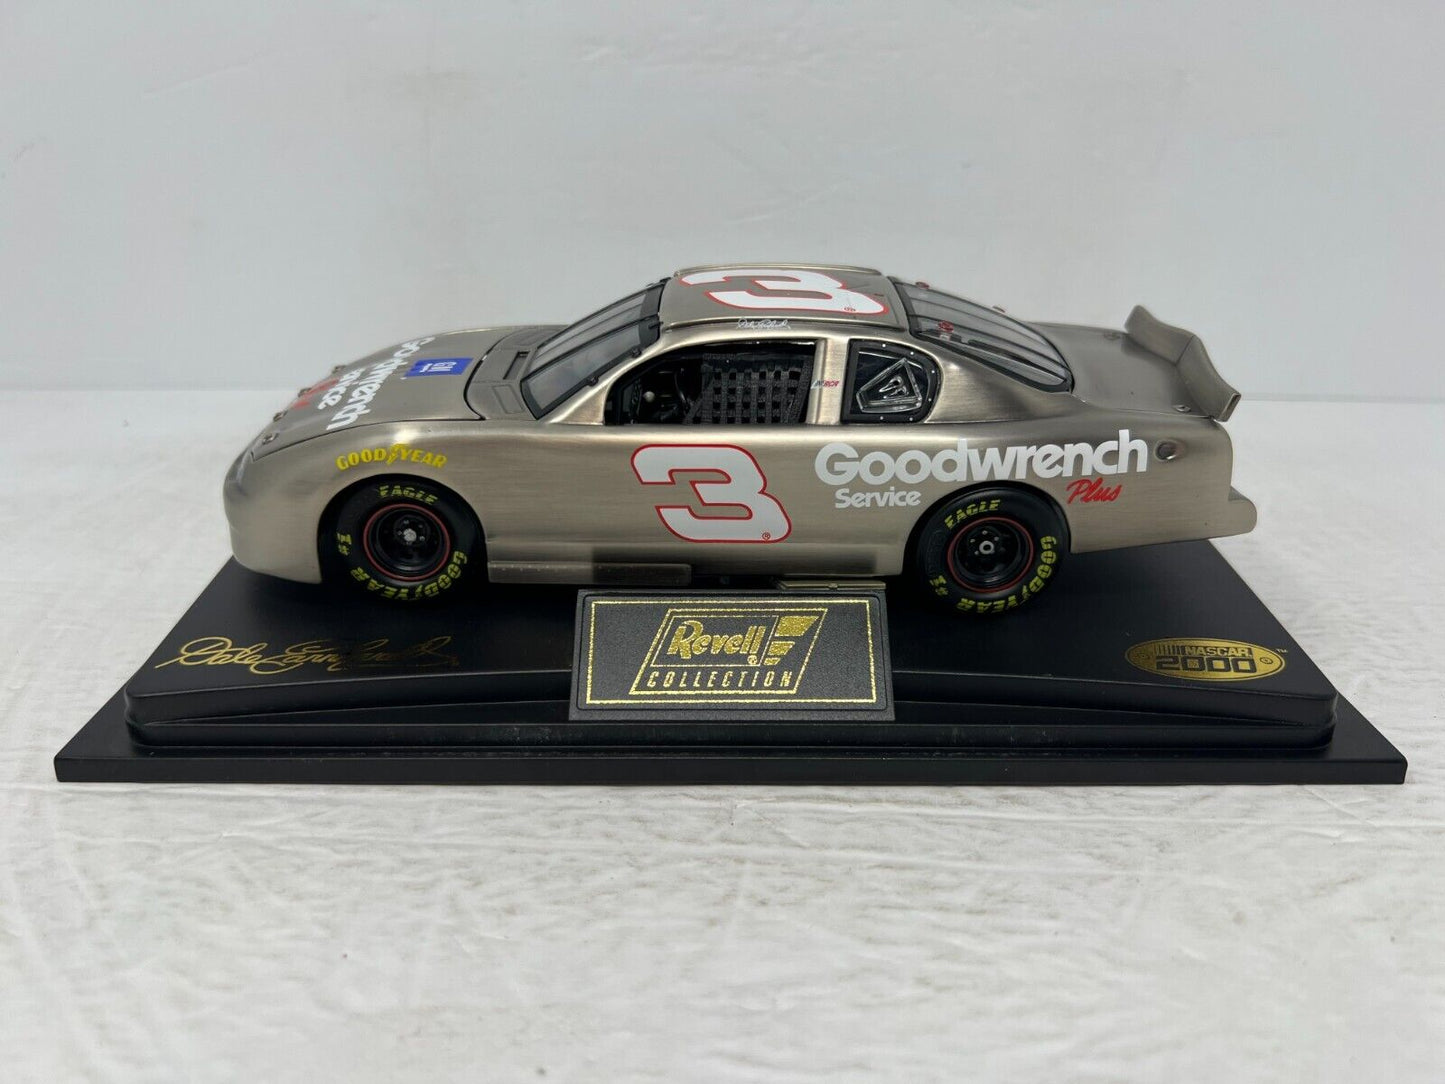 Revell Nascar #3 Dale Earnhardt GM Goodwrench 2000 Chevy Test Car 1:24 Diecast